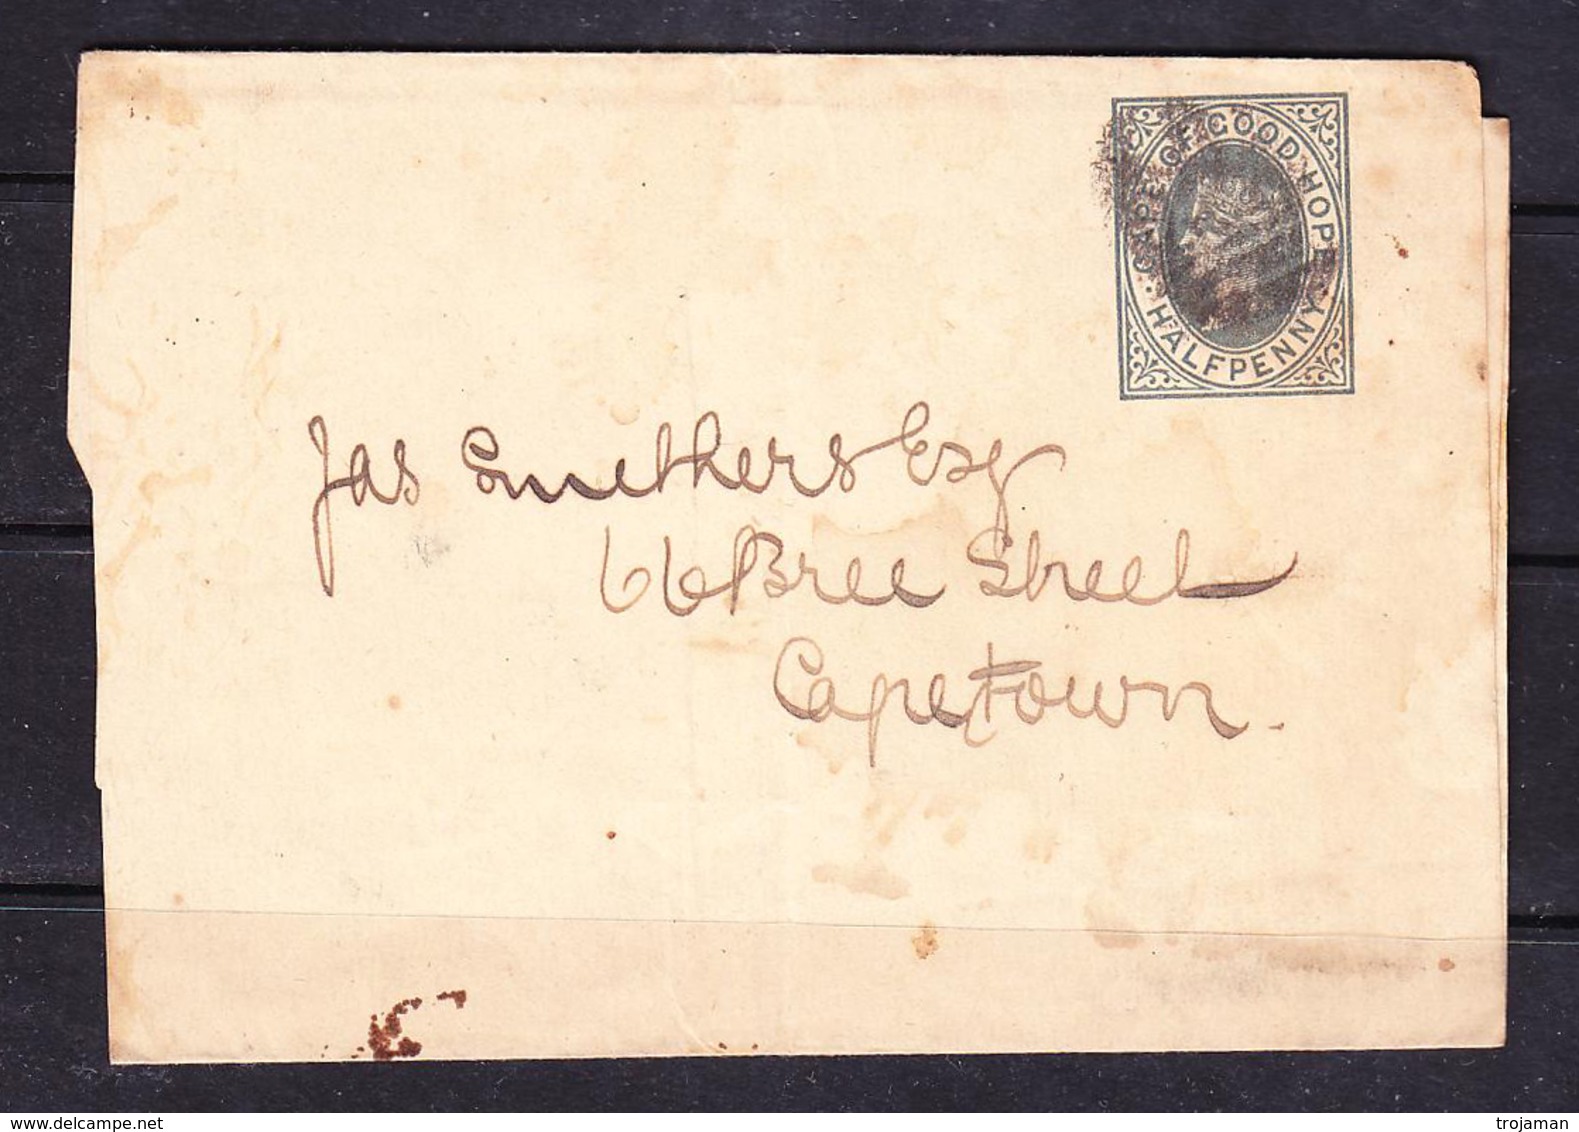 SC 19-95 CAPE OF GOOD HOPE. HALF PENNY. LETTER TO CAPETOWN. - Cape Of Good Hope (1853-1904)